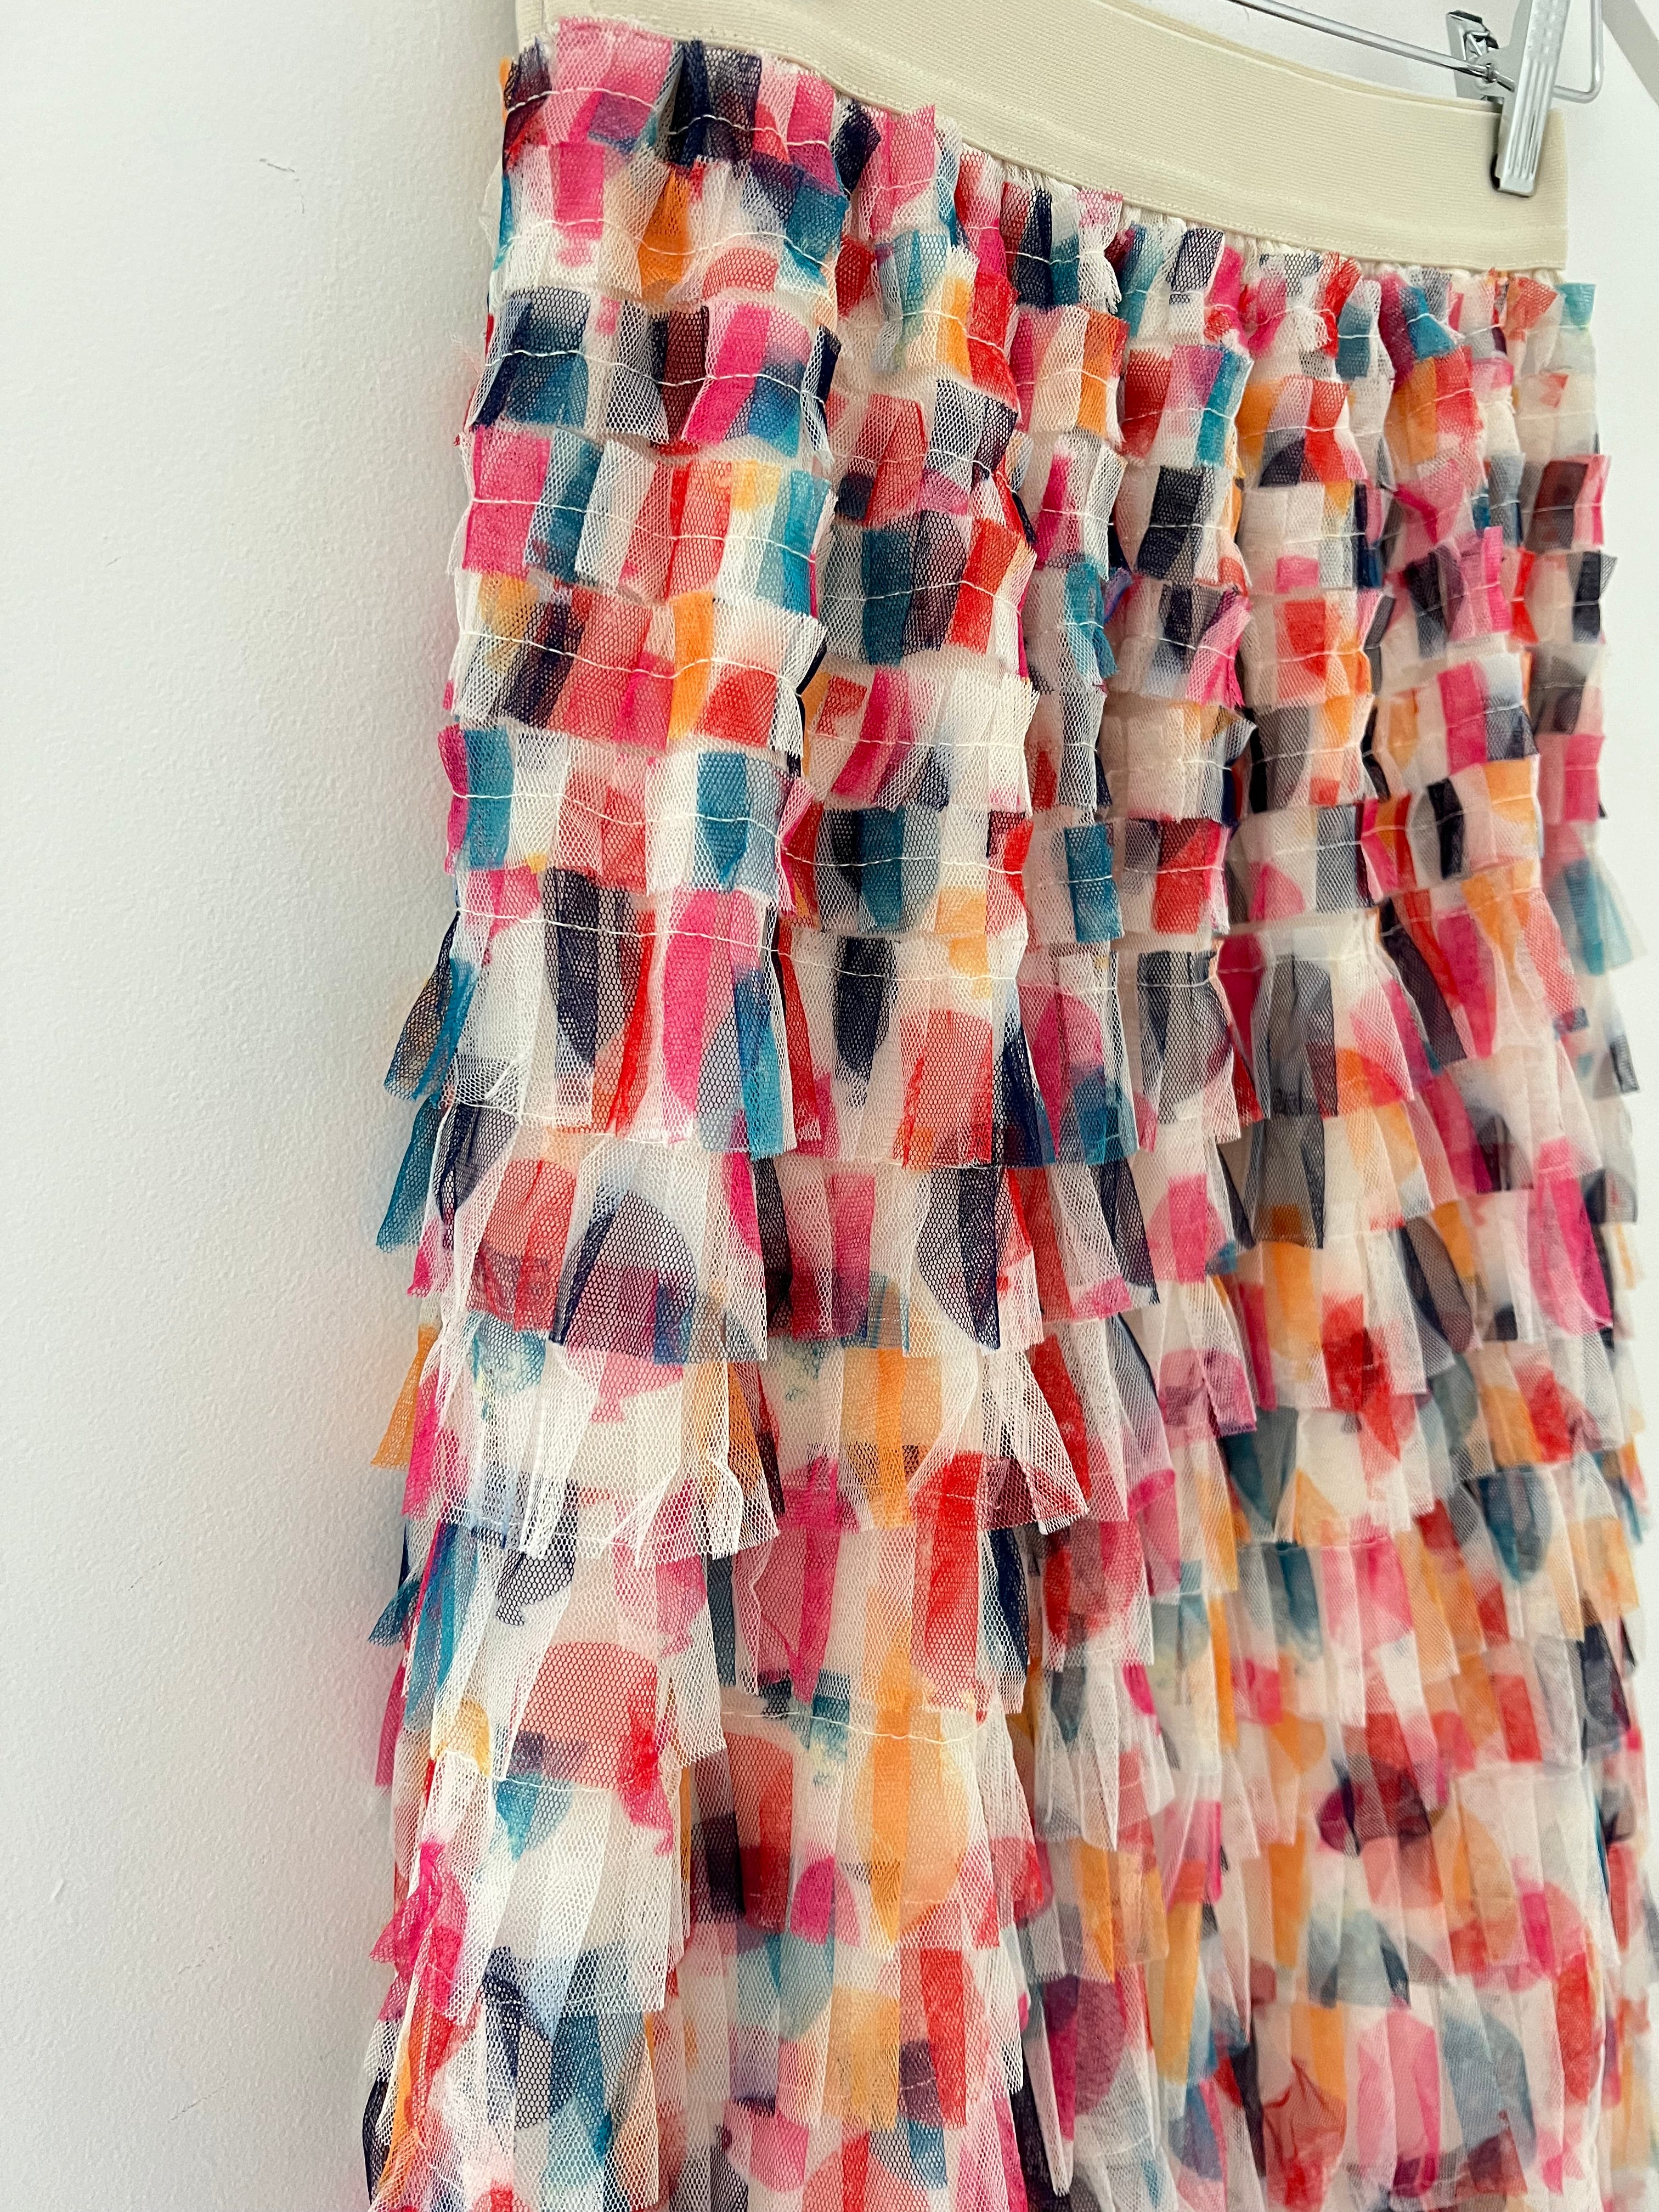 Tulle Midi Skirt in Brights